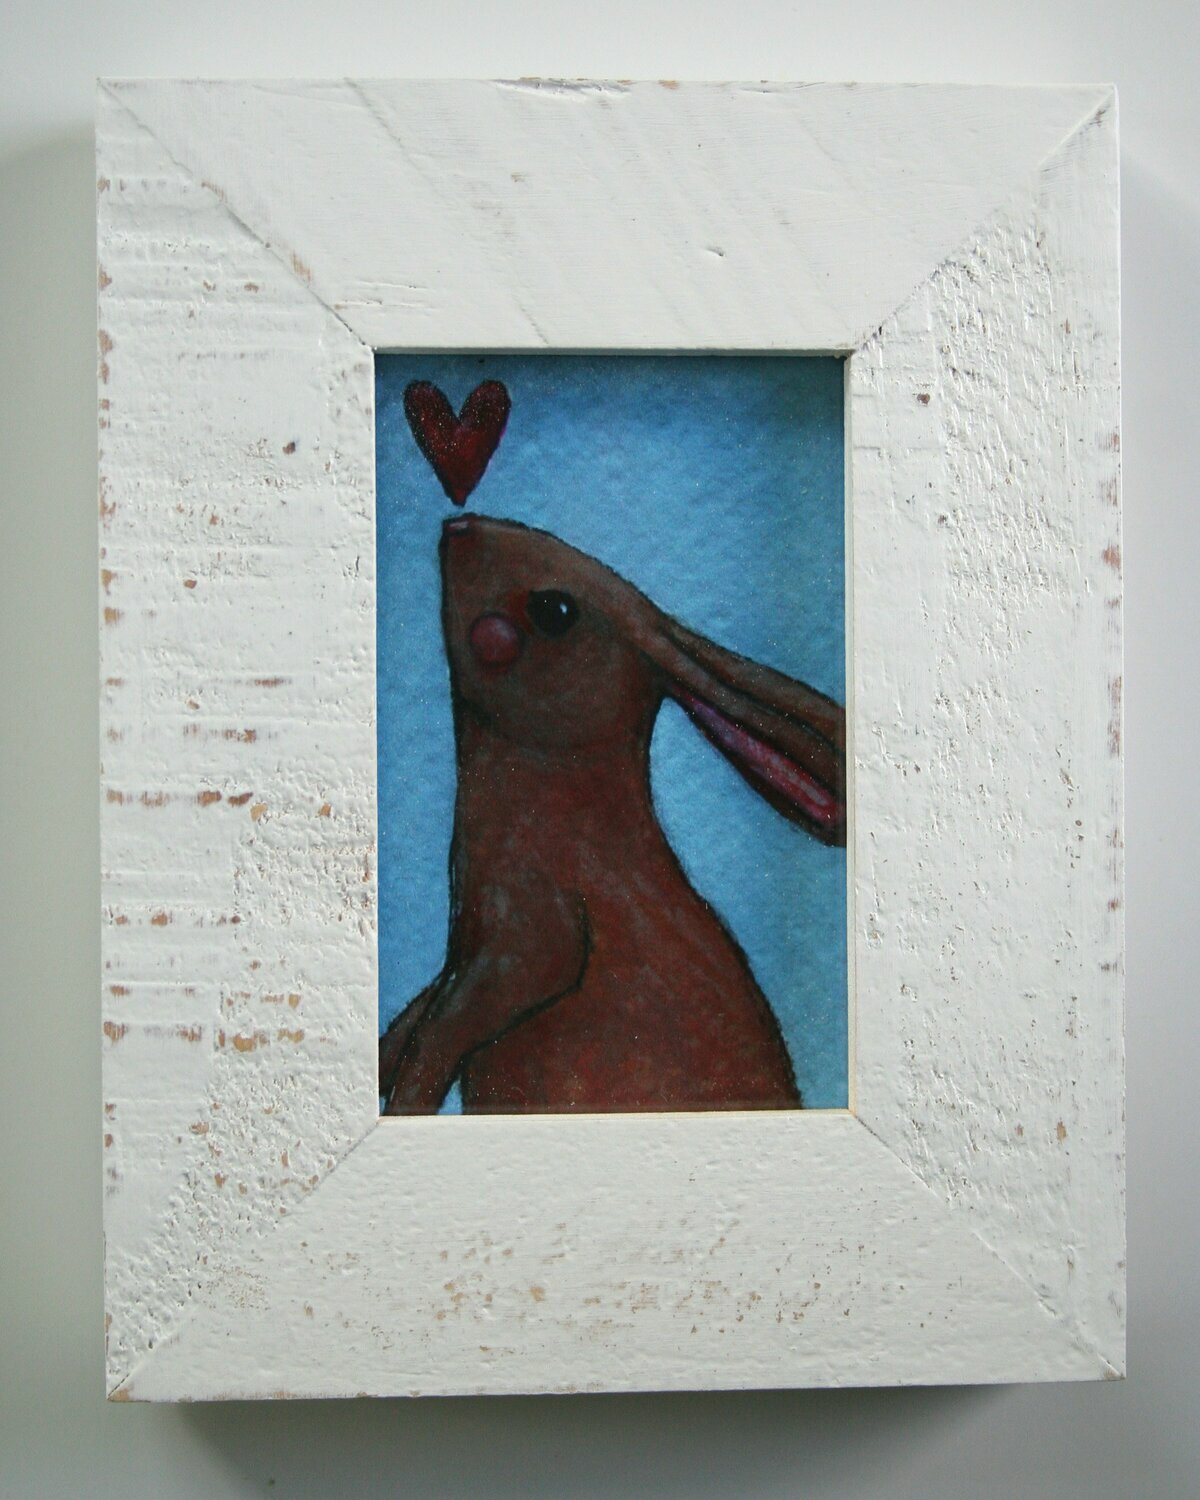 bunny with heart 2x3" a2n2koon giclee print framed in distressed white wood stand-up frame miniature cute rabbit artwork comes in gift box